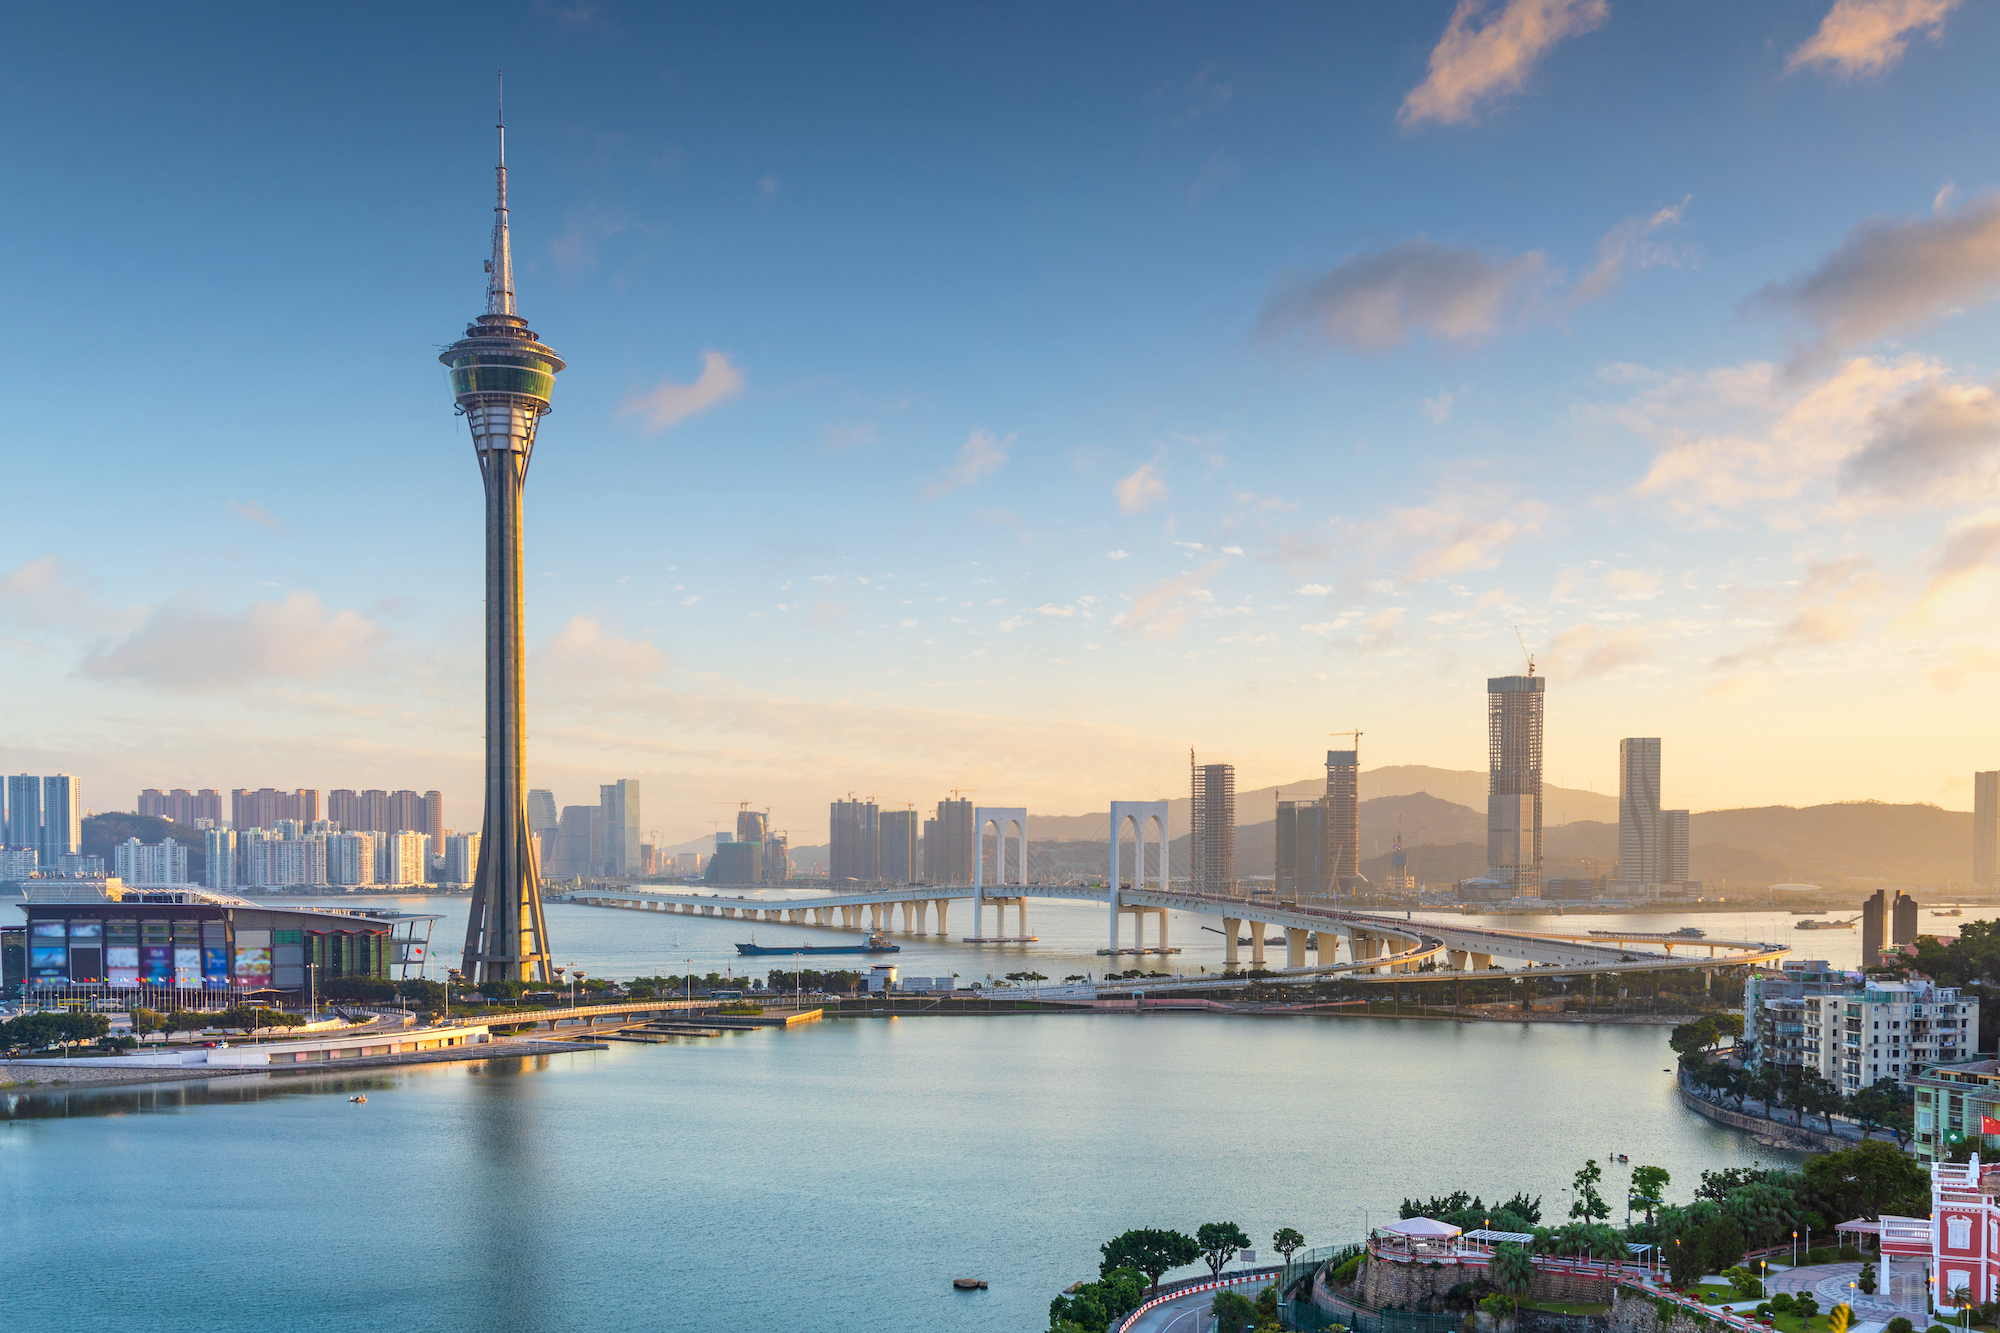 800 new jobs: Macao’s investment agency is making its mark